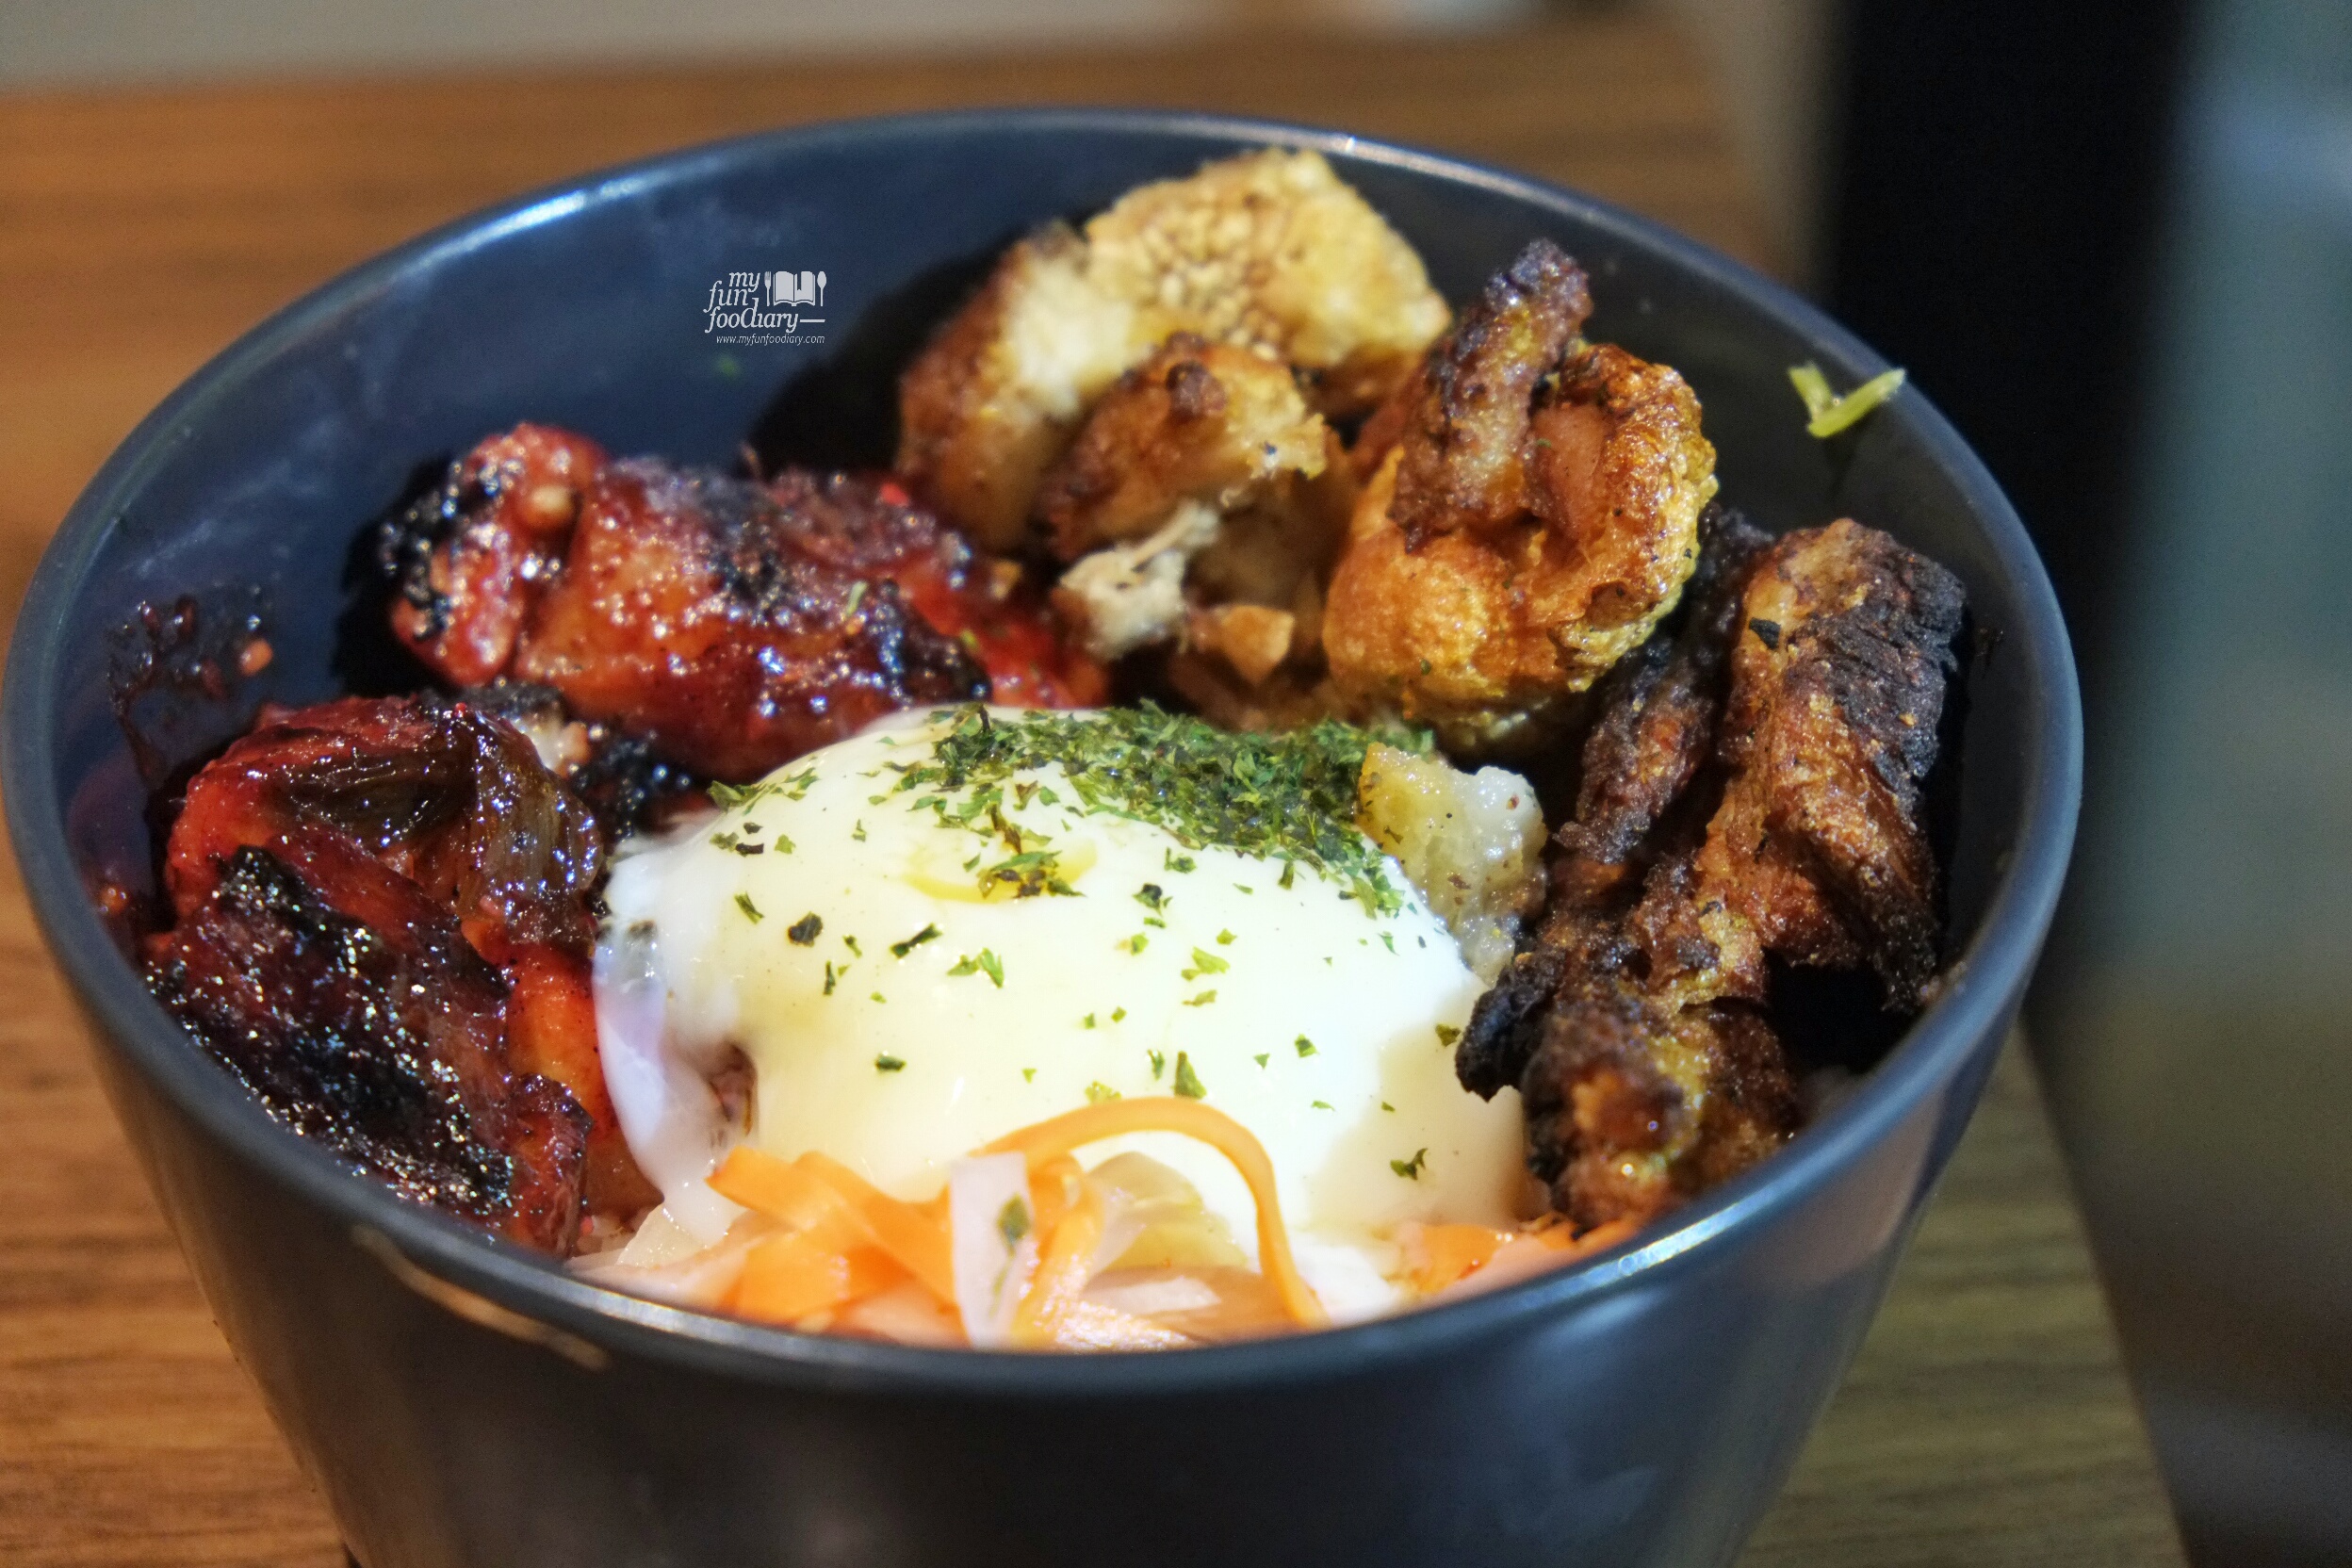 Pork Two Ways Rice Bowl at Commune Bistro and Grill by Myfunfoodiary